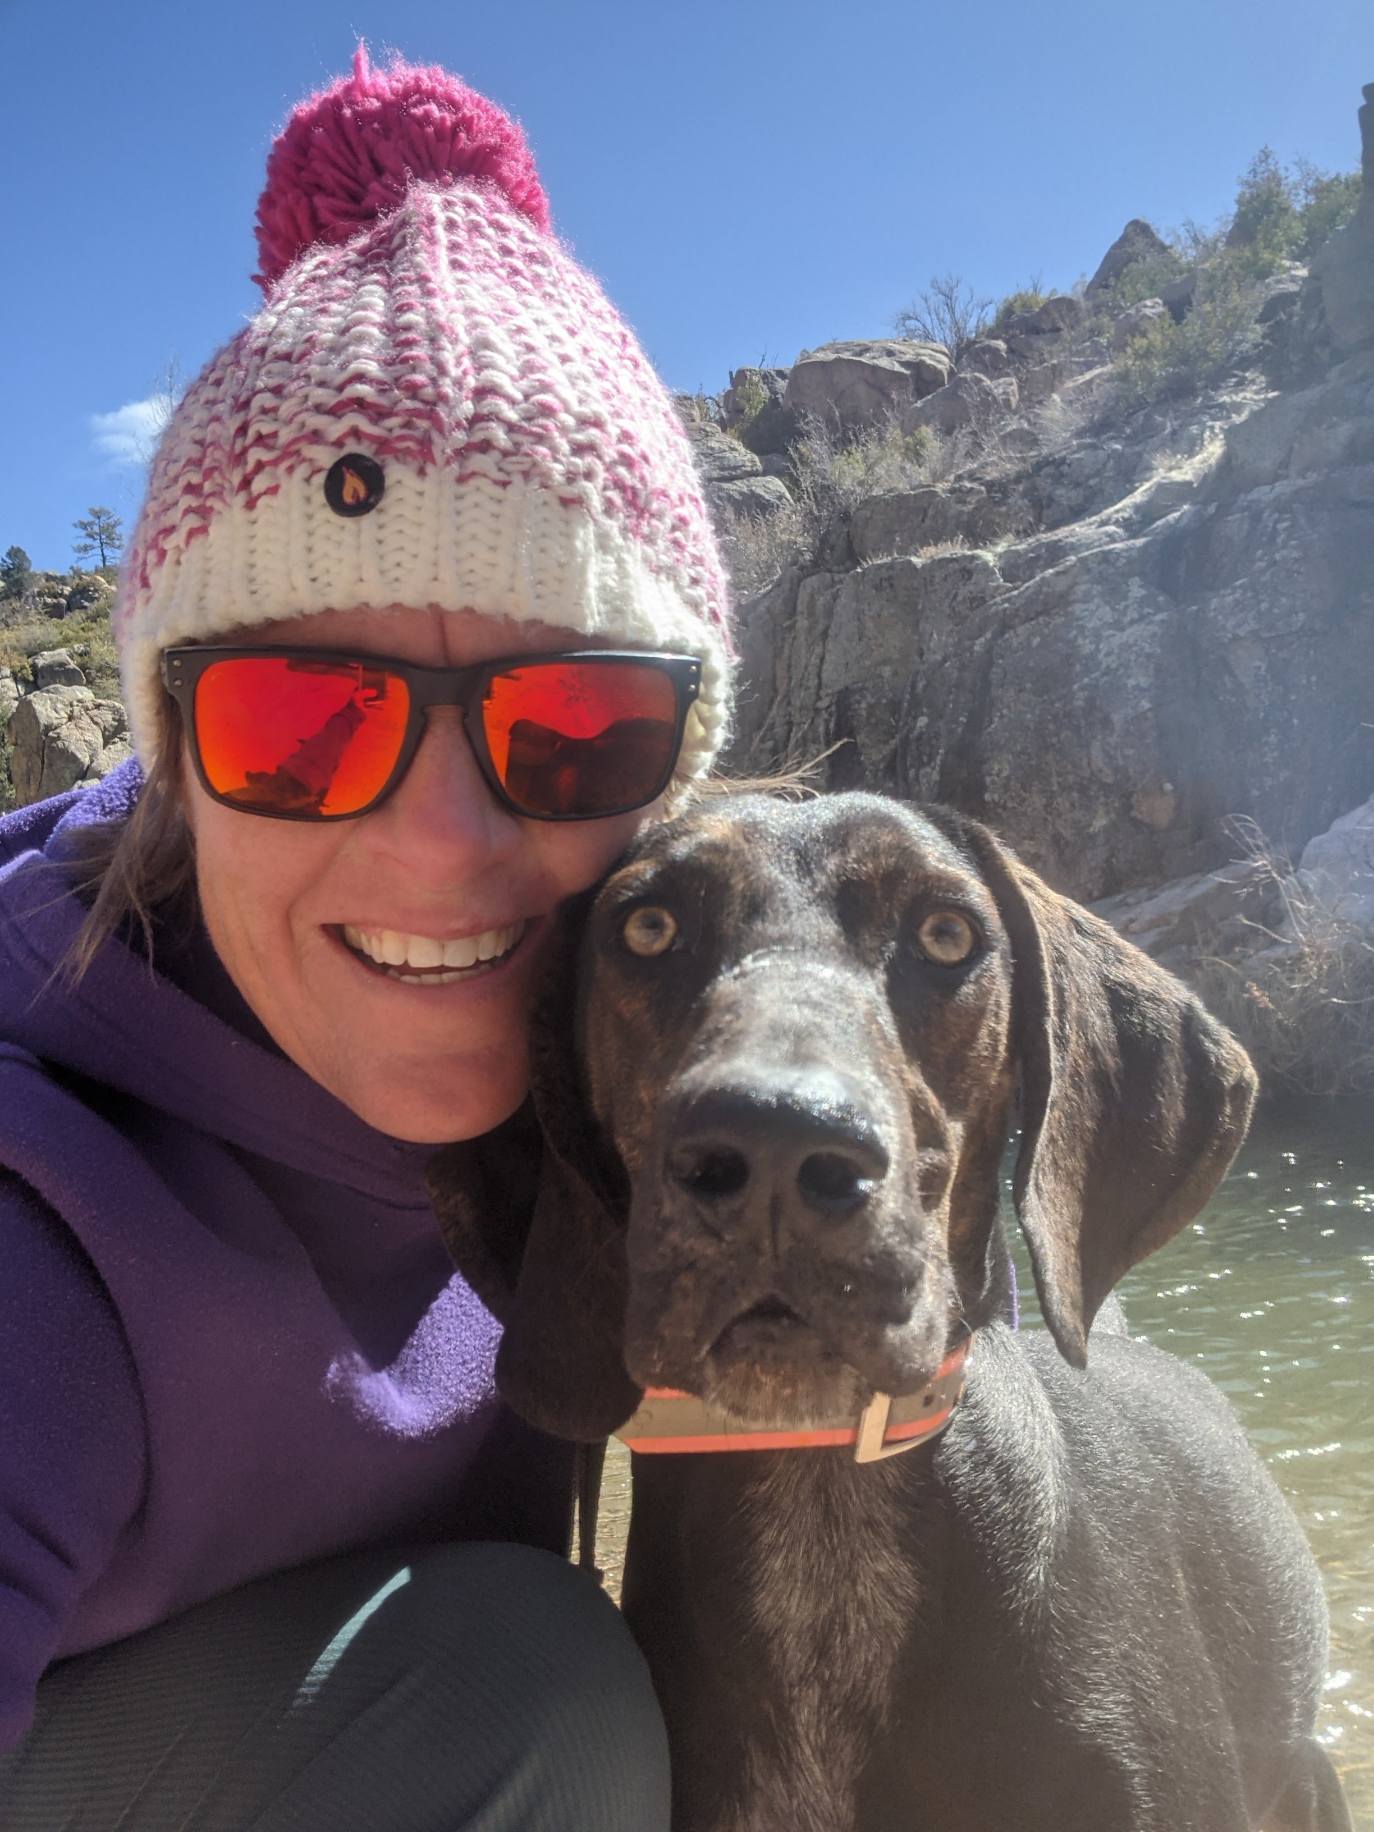 Laurel Darren, owner of the Wild Bunch Desert Guides, pauses during a hike to pose for a selfie with one of her two Plott Hounds, Waylon, with a picturesque backdrop behind them.